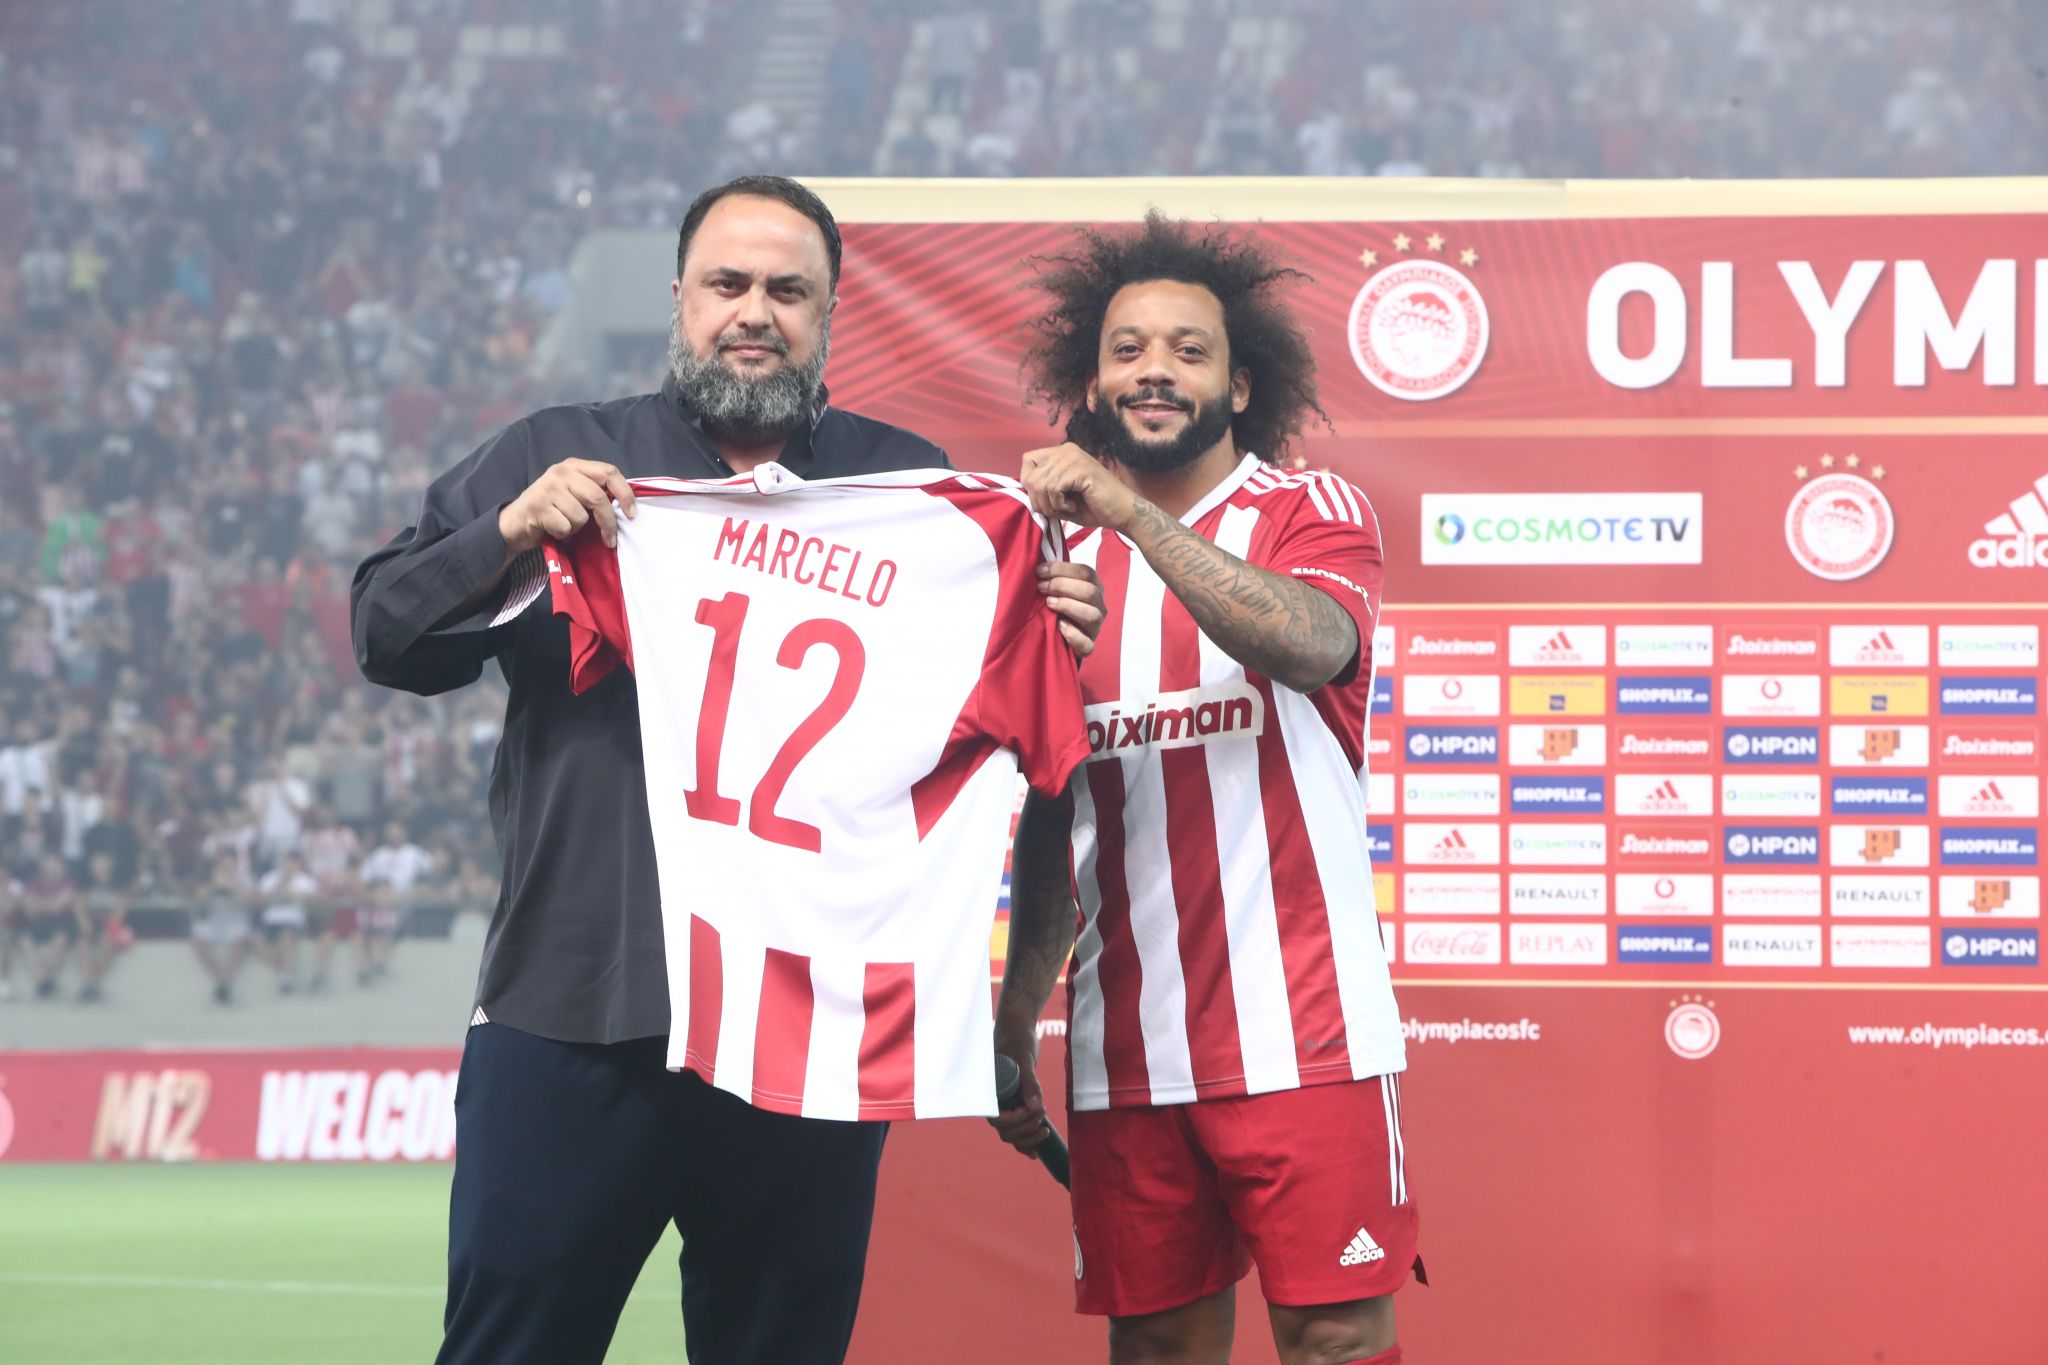 https://www.olympiacos.org/wp-content/uploads/2022/09/05/5671847.jpg